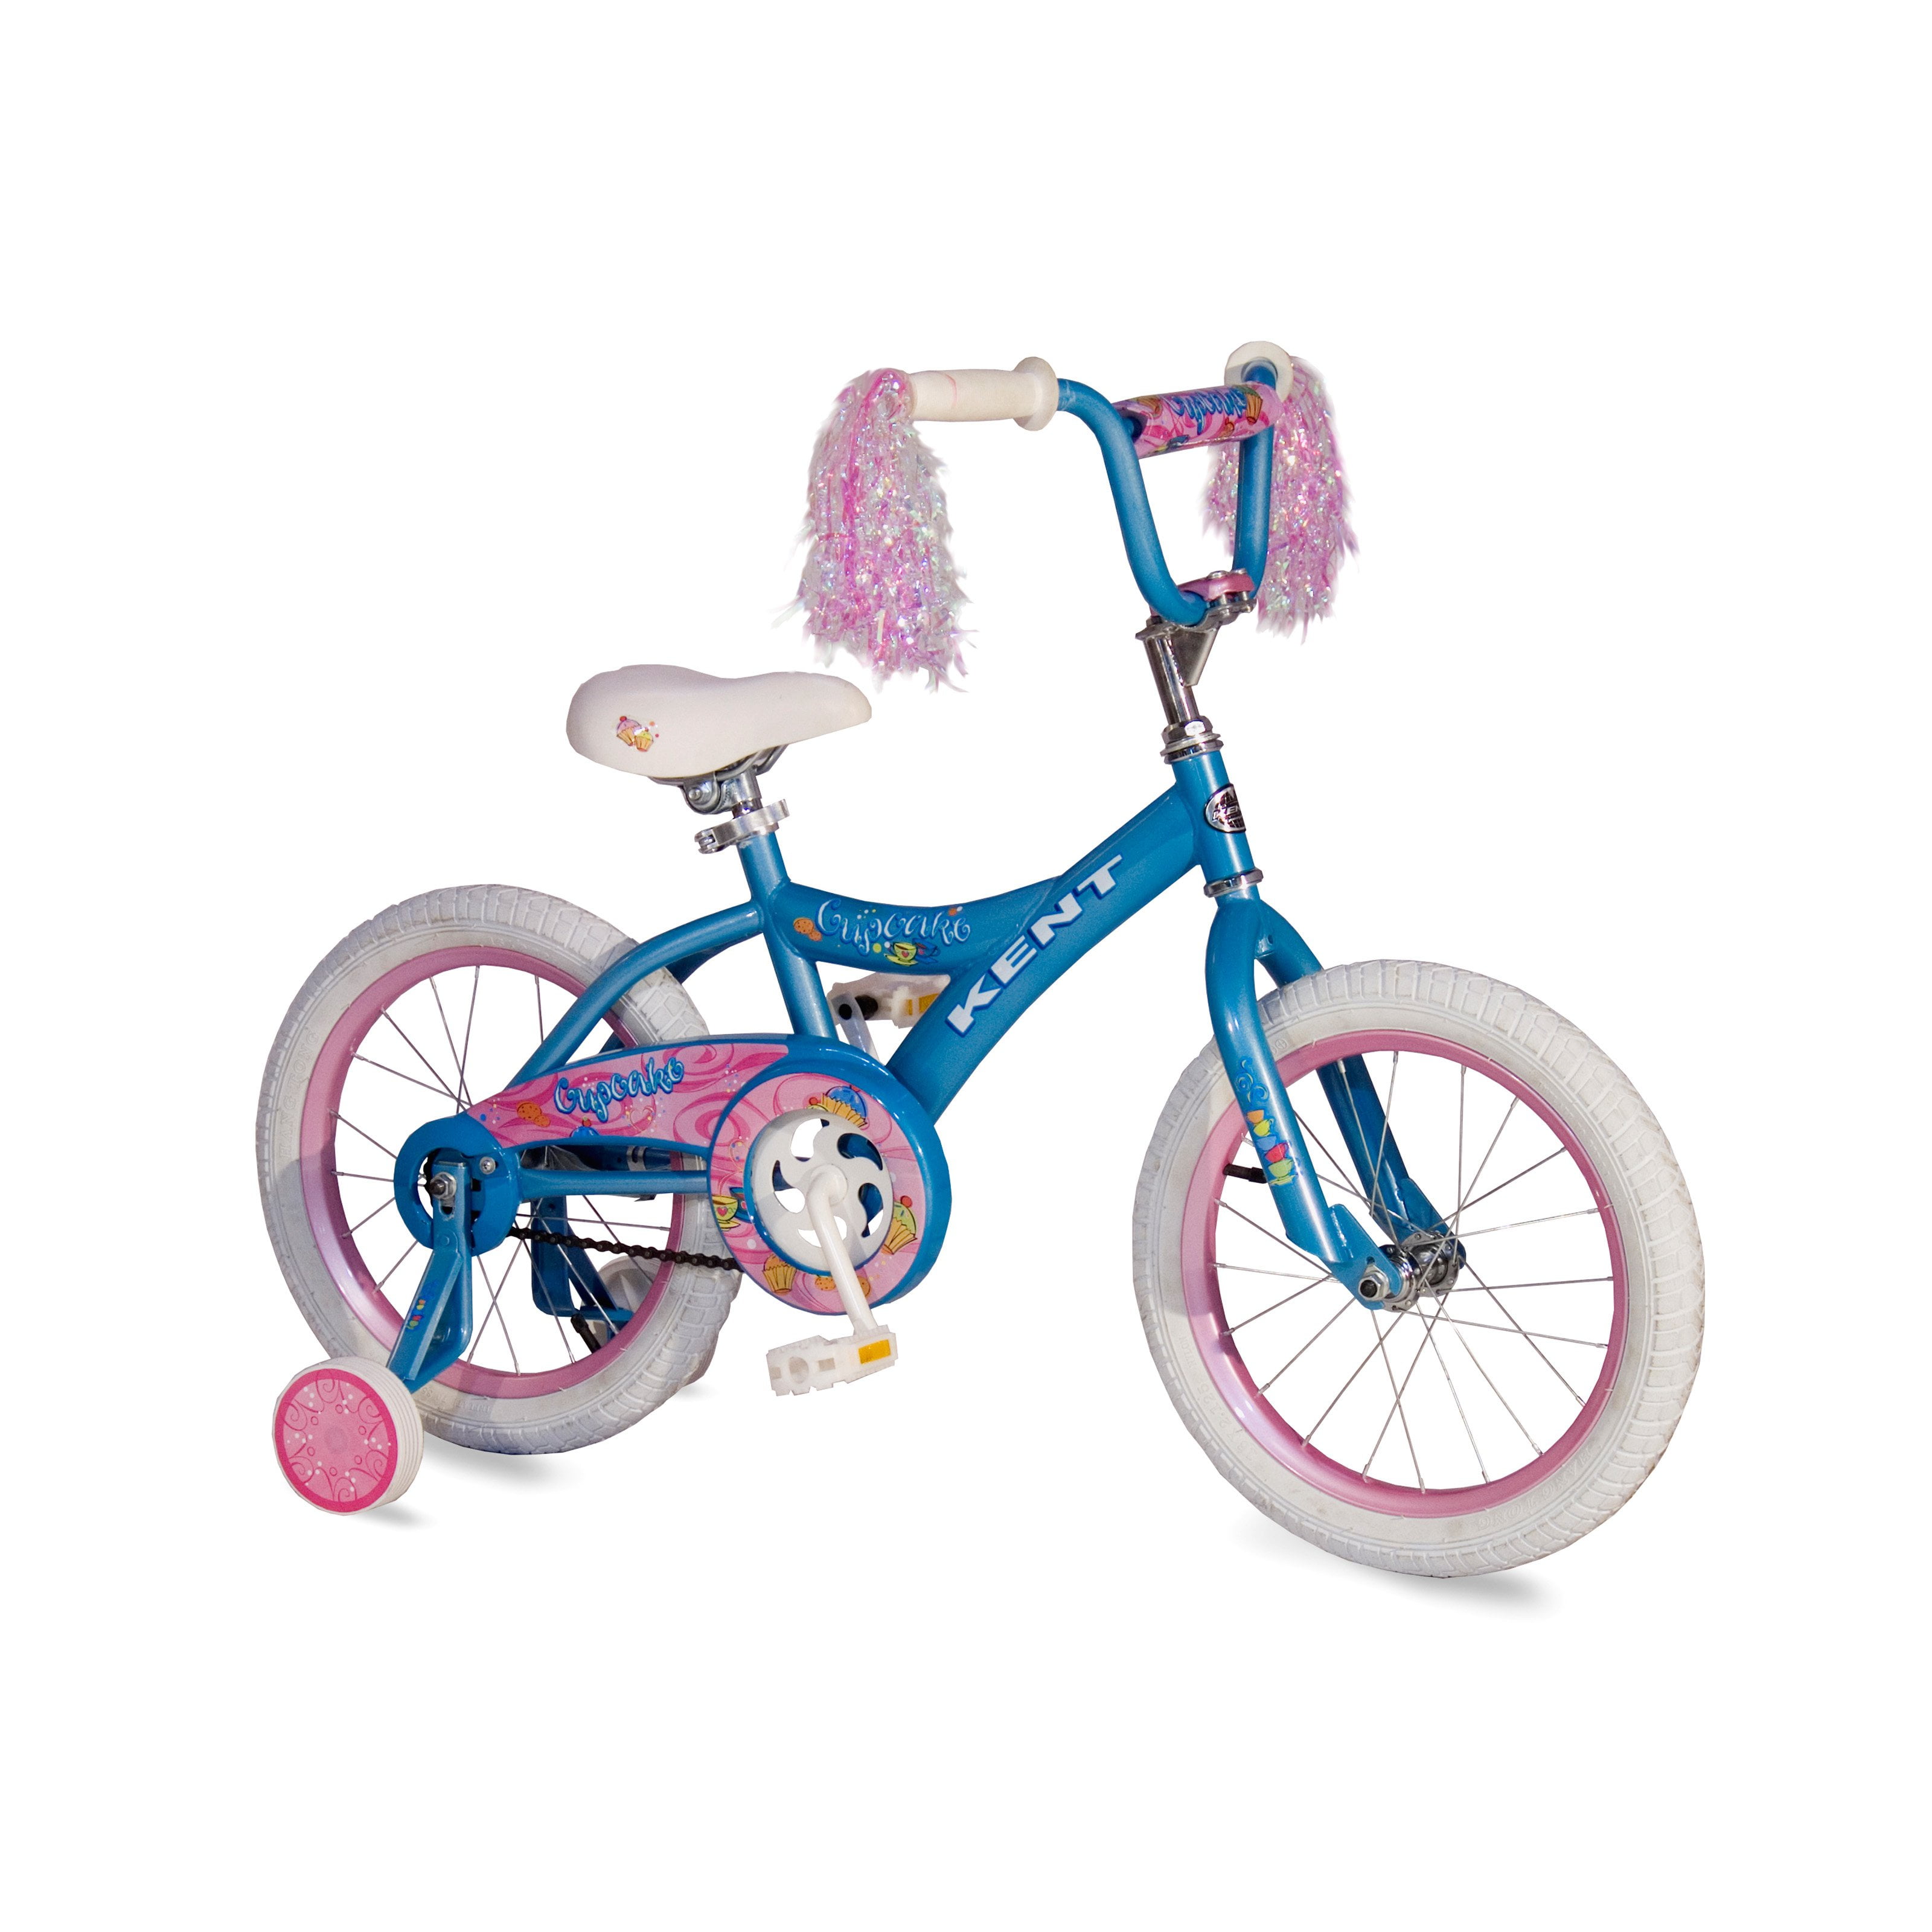 Kent Bicycle Training Wheels for 16-20-Inch Bicycles 